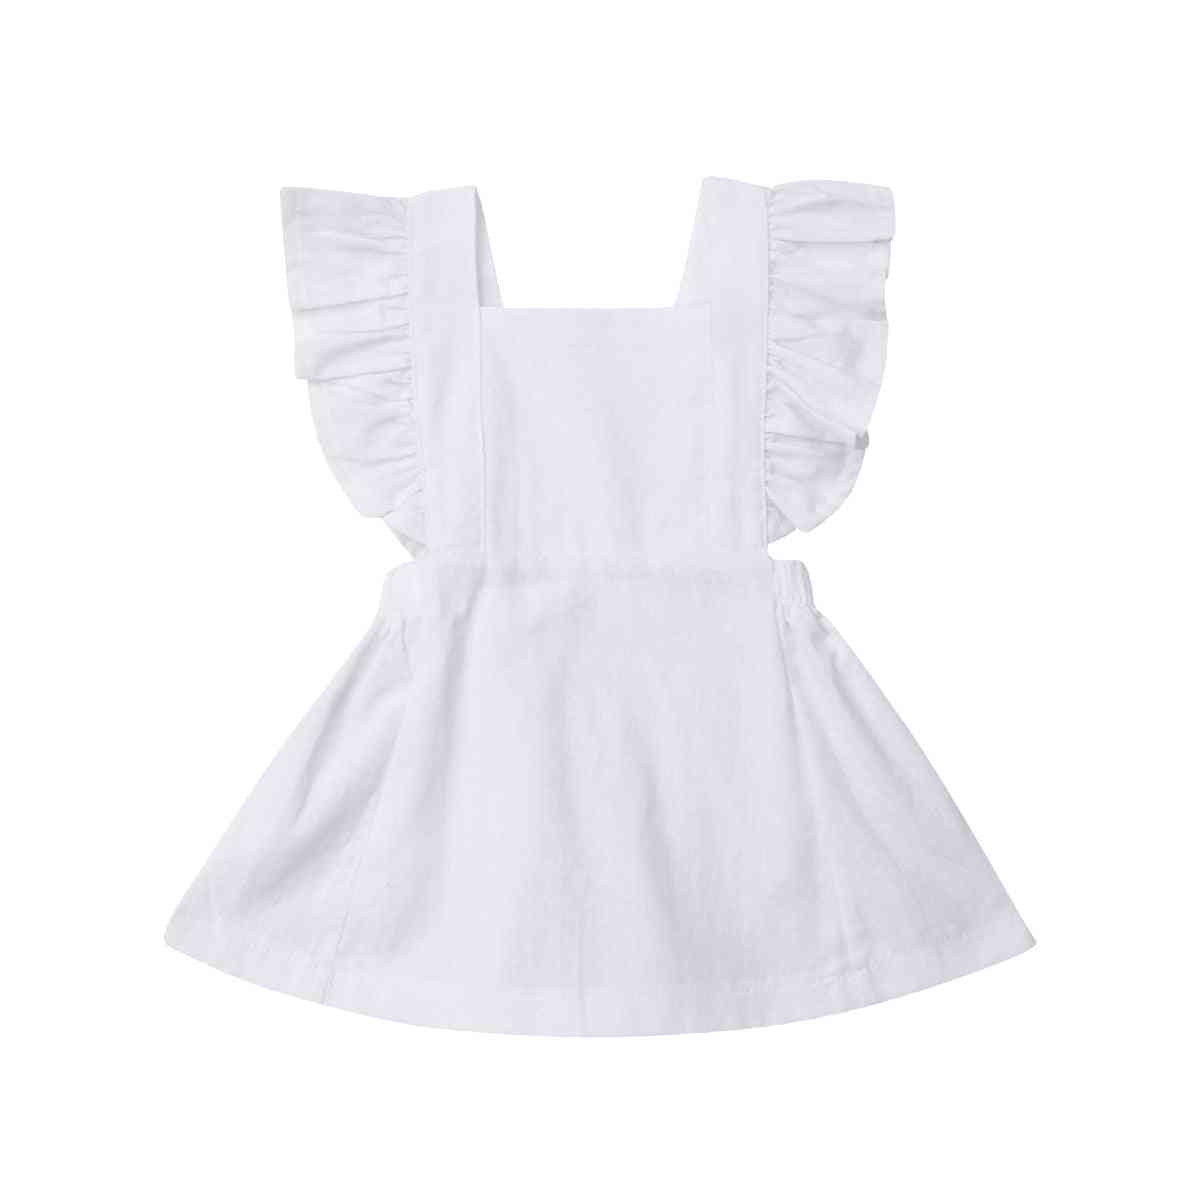 Knee Length, Casual Cute Ruffle Princess Party Dress For Baby